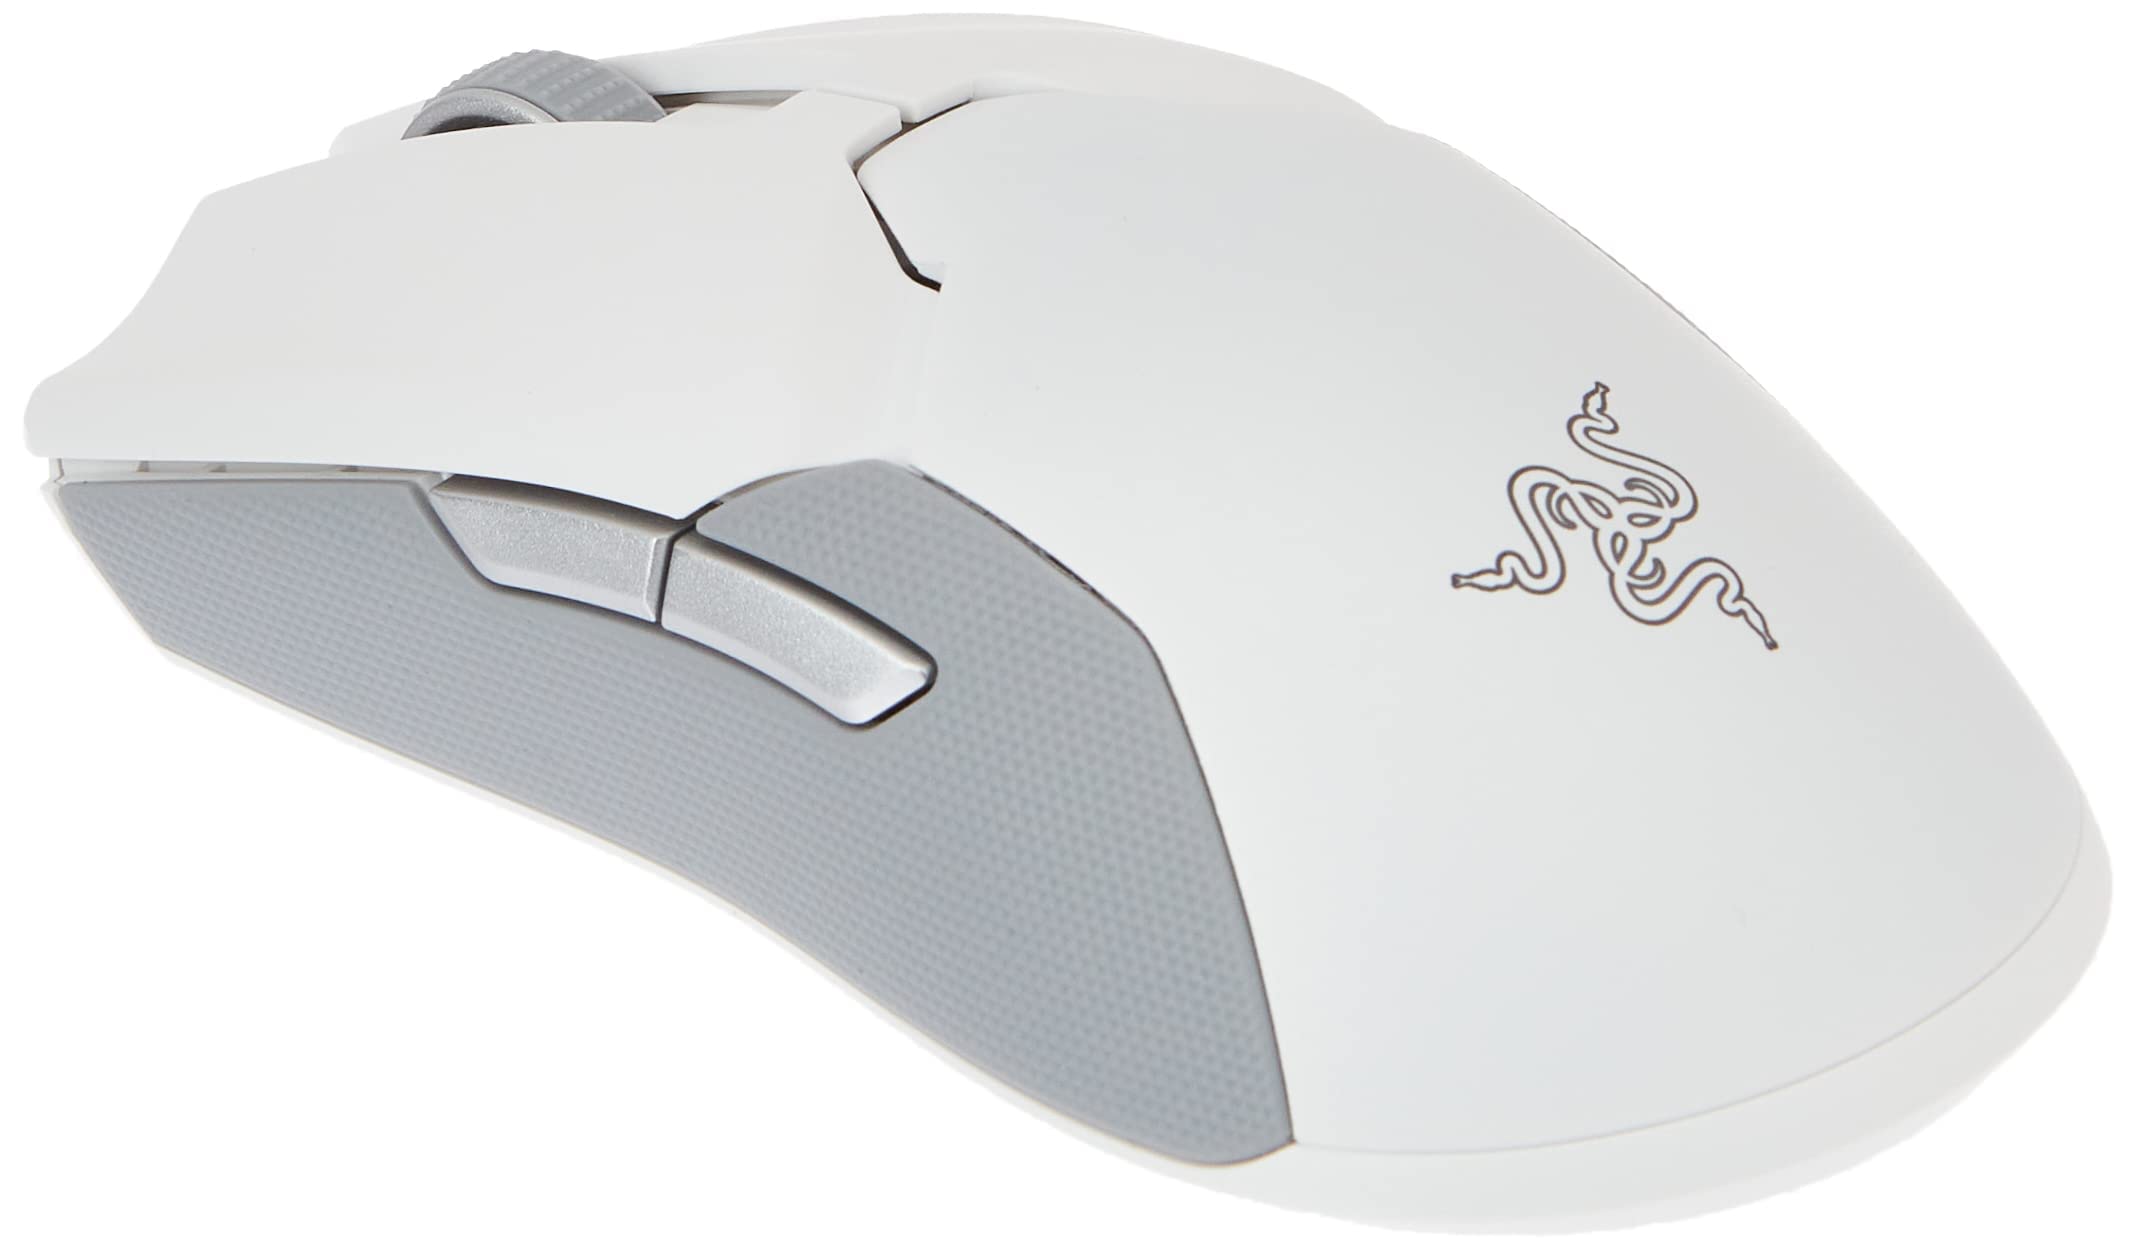 Razer Ambidextrous Viper Ultimate Gaming Mouse